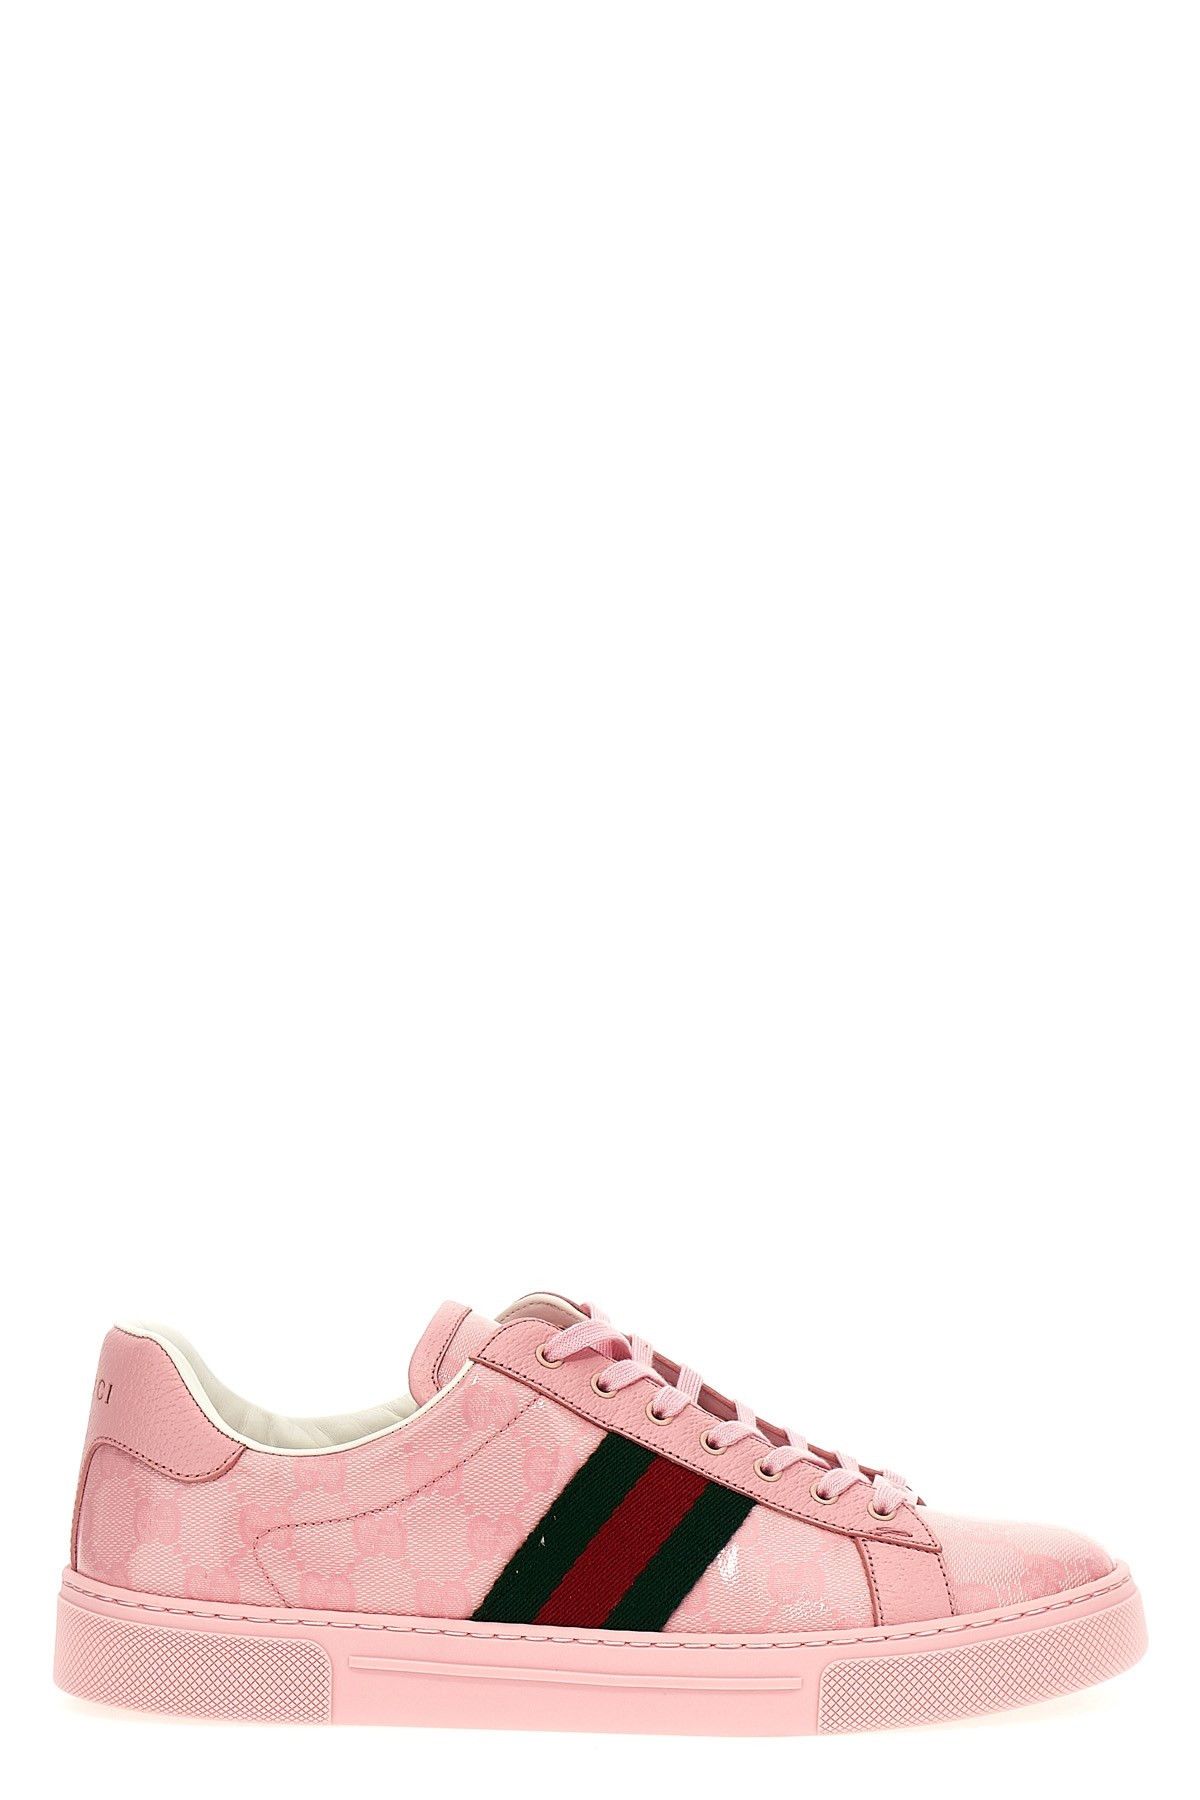 Gucci 'Ace' sneakers | Grailed